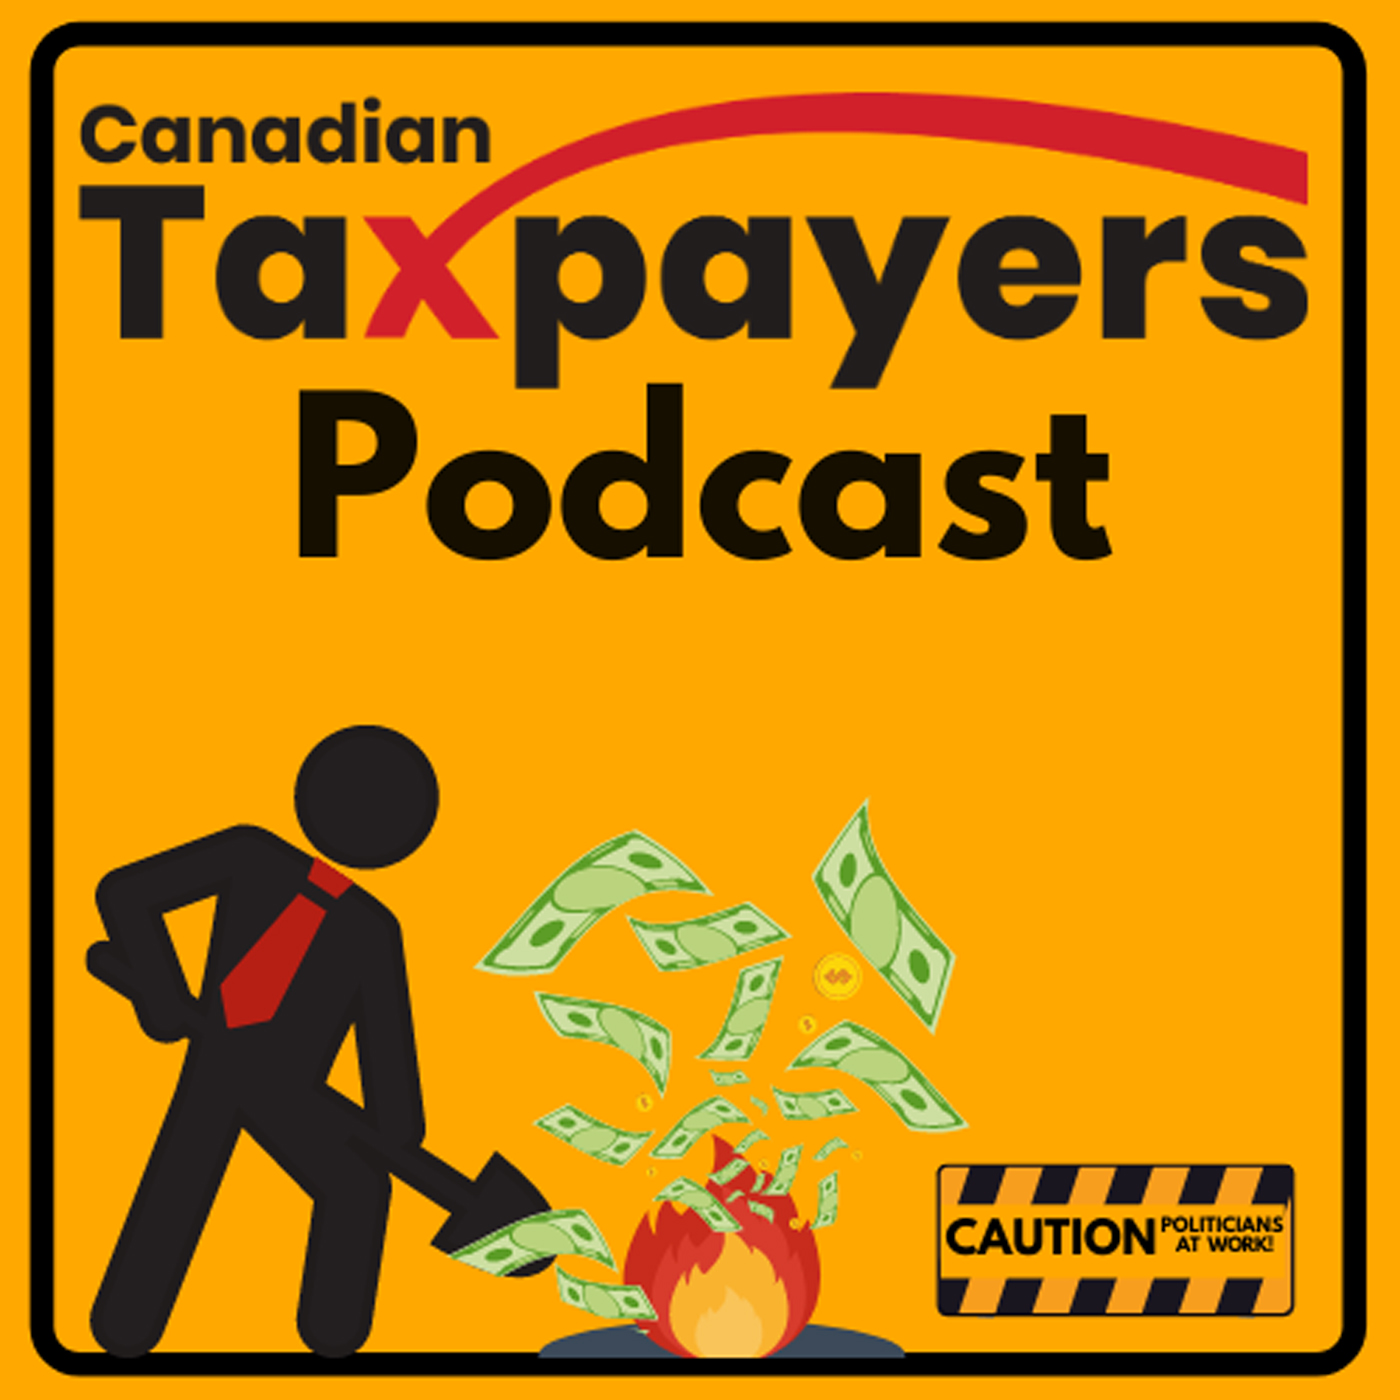 #28 INTERVIEW Dan McTeague – Canadians for Affordable Energy president talks about Trudeau’s second carbon tax